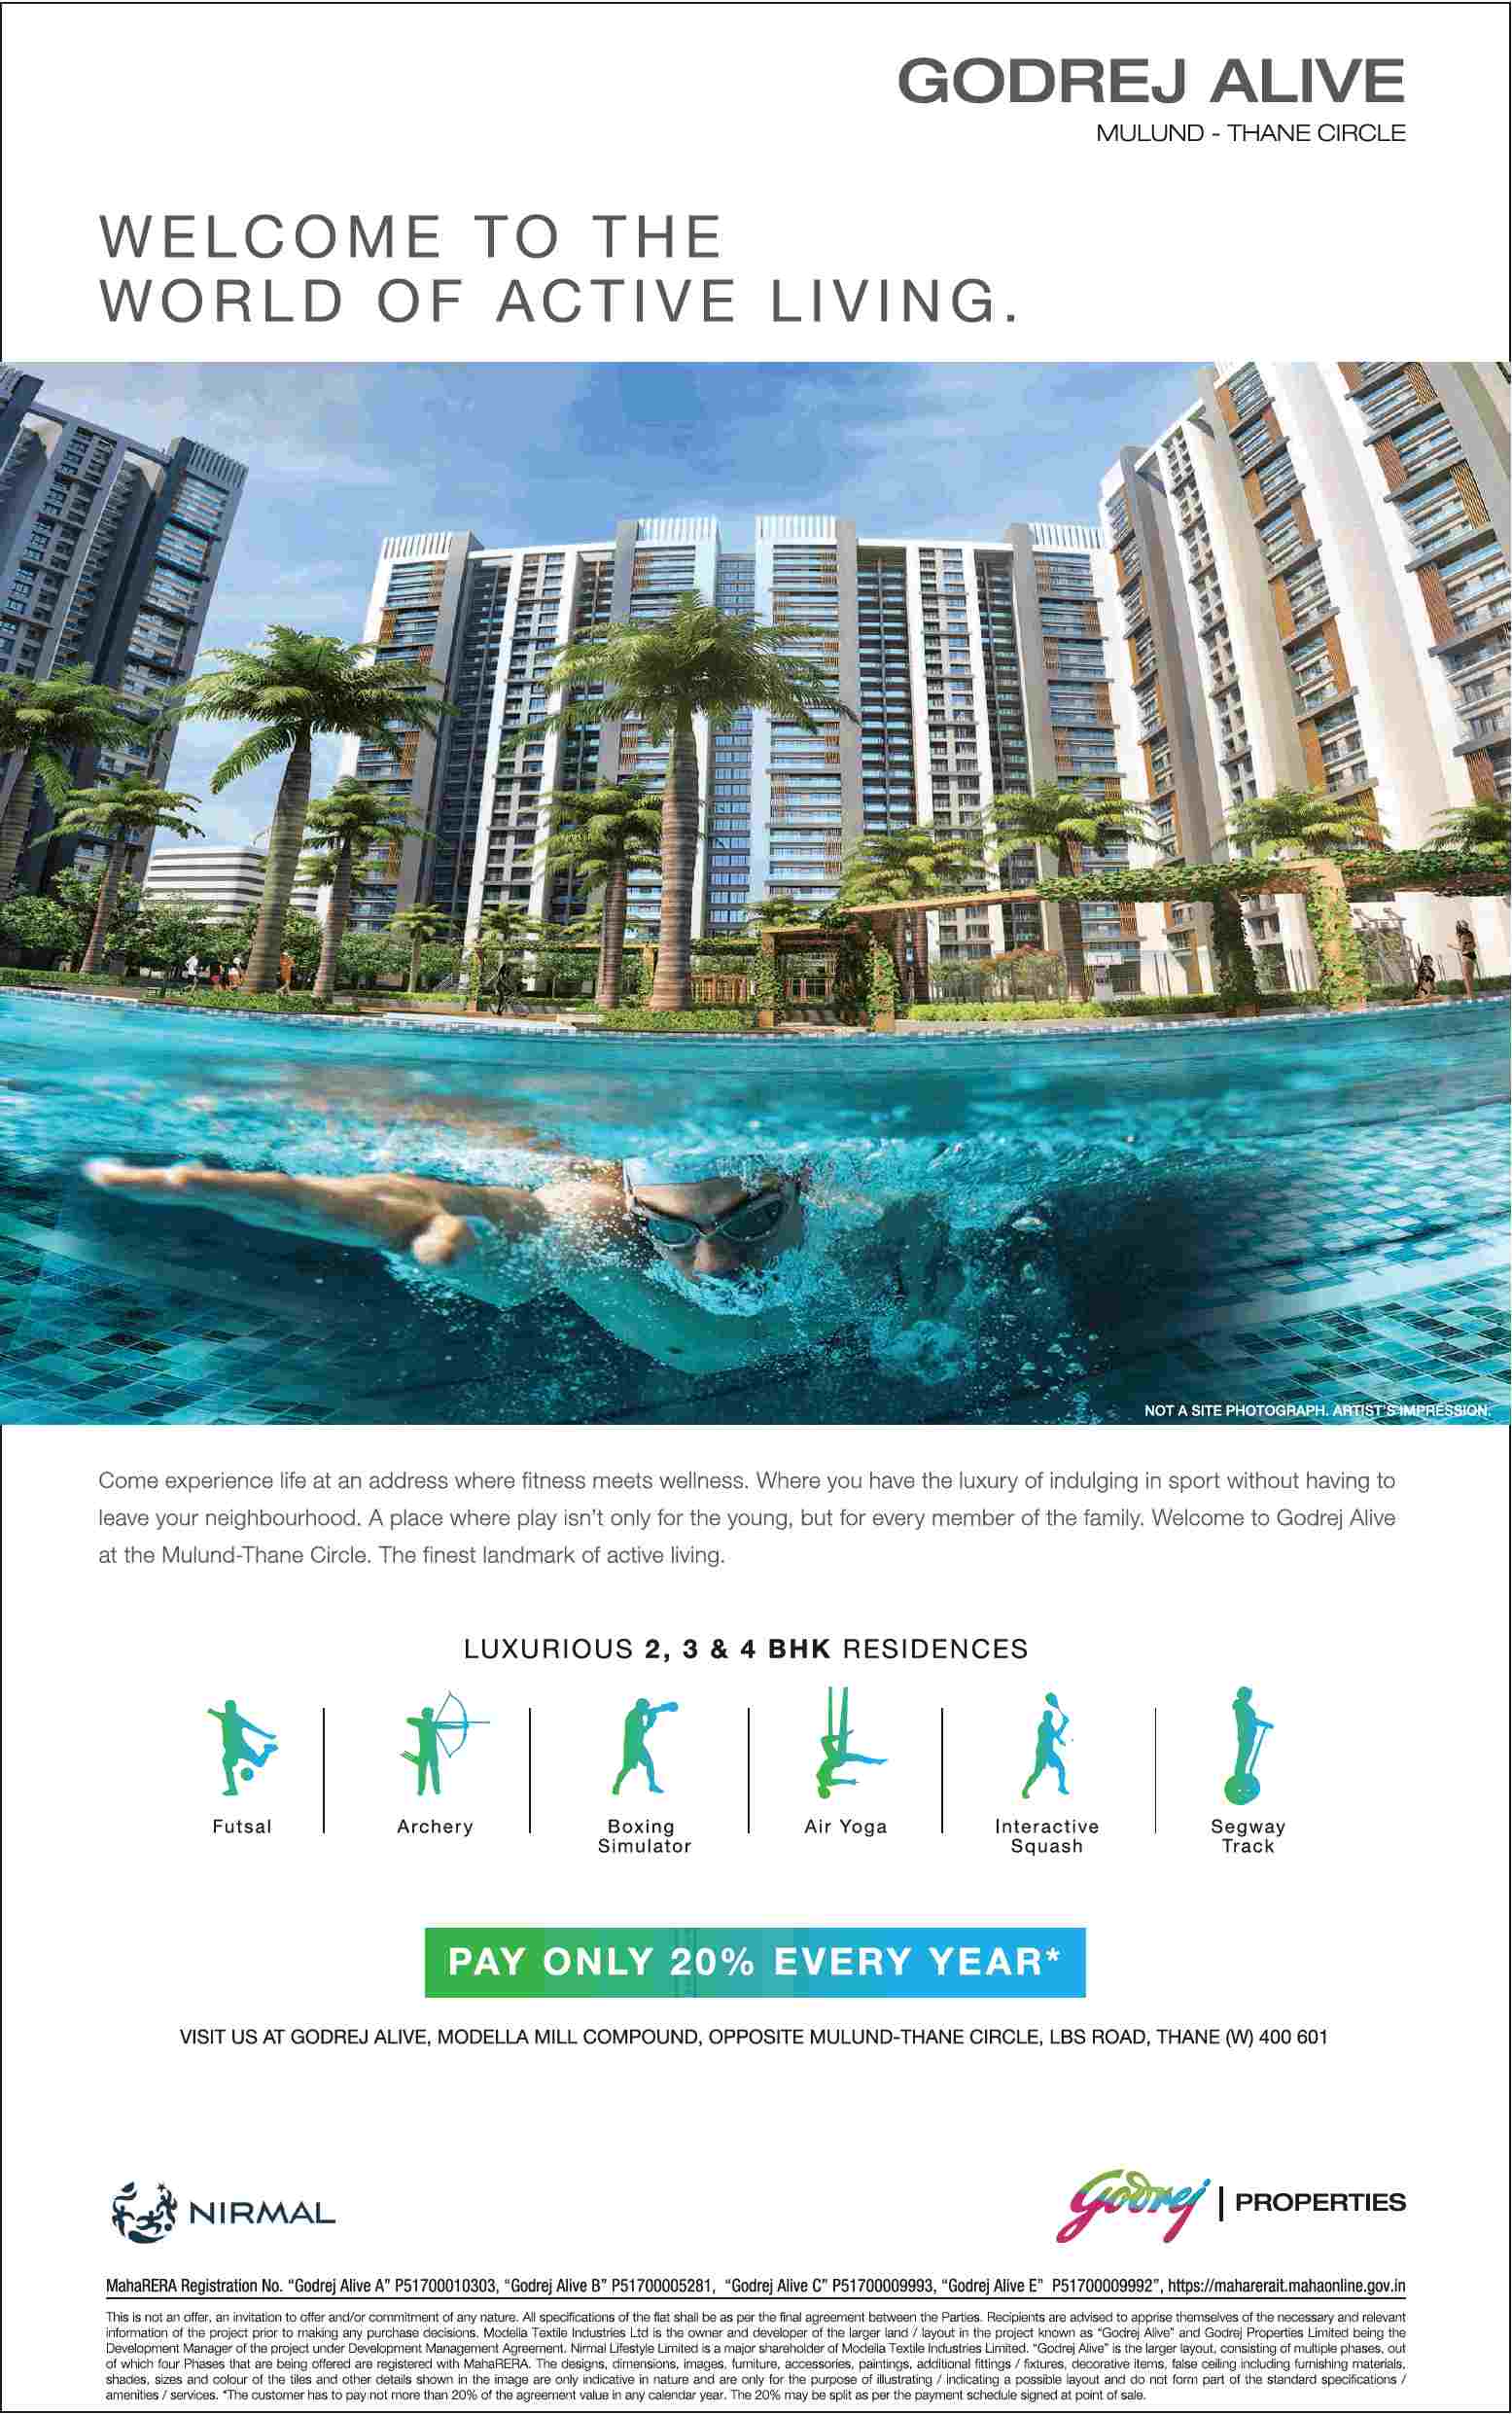 Book home & pay only 20% every year at Godrej Alive in Mumbai Update